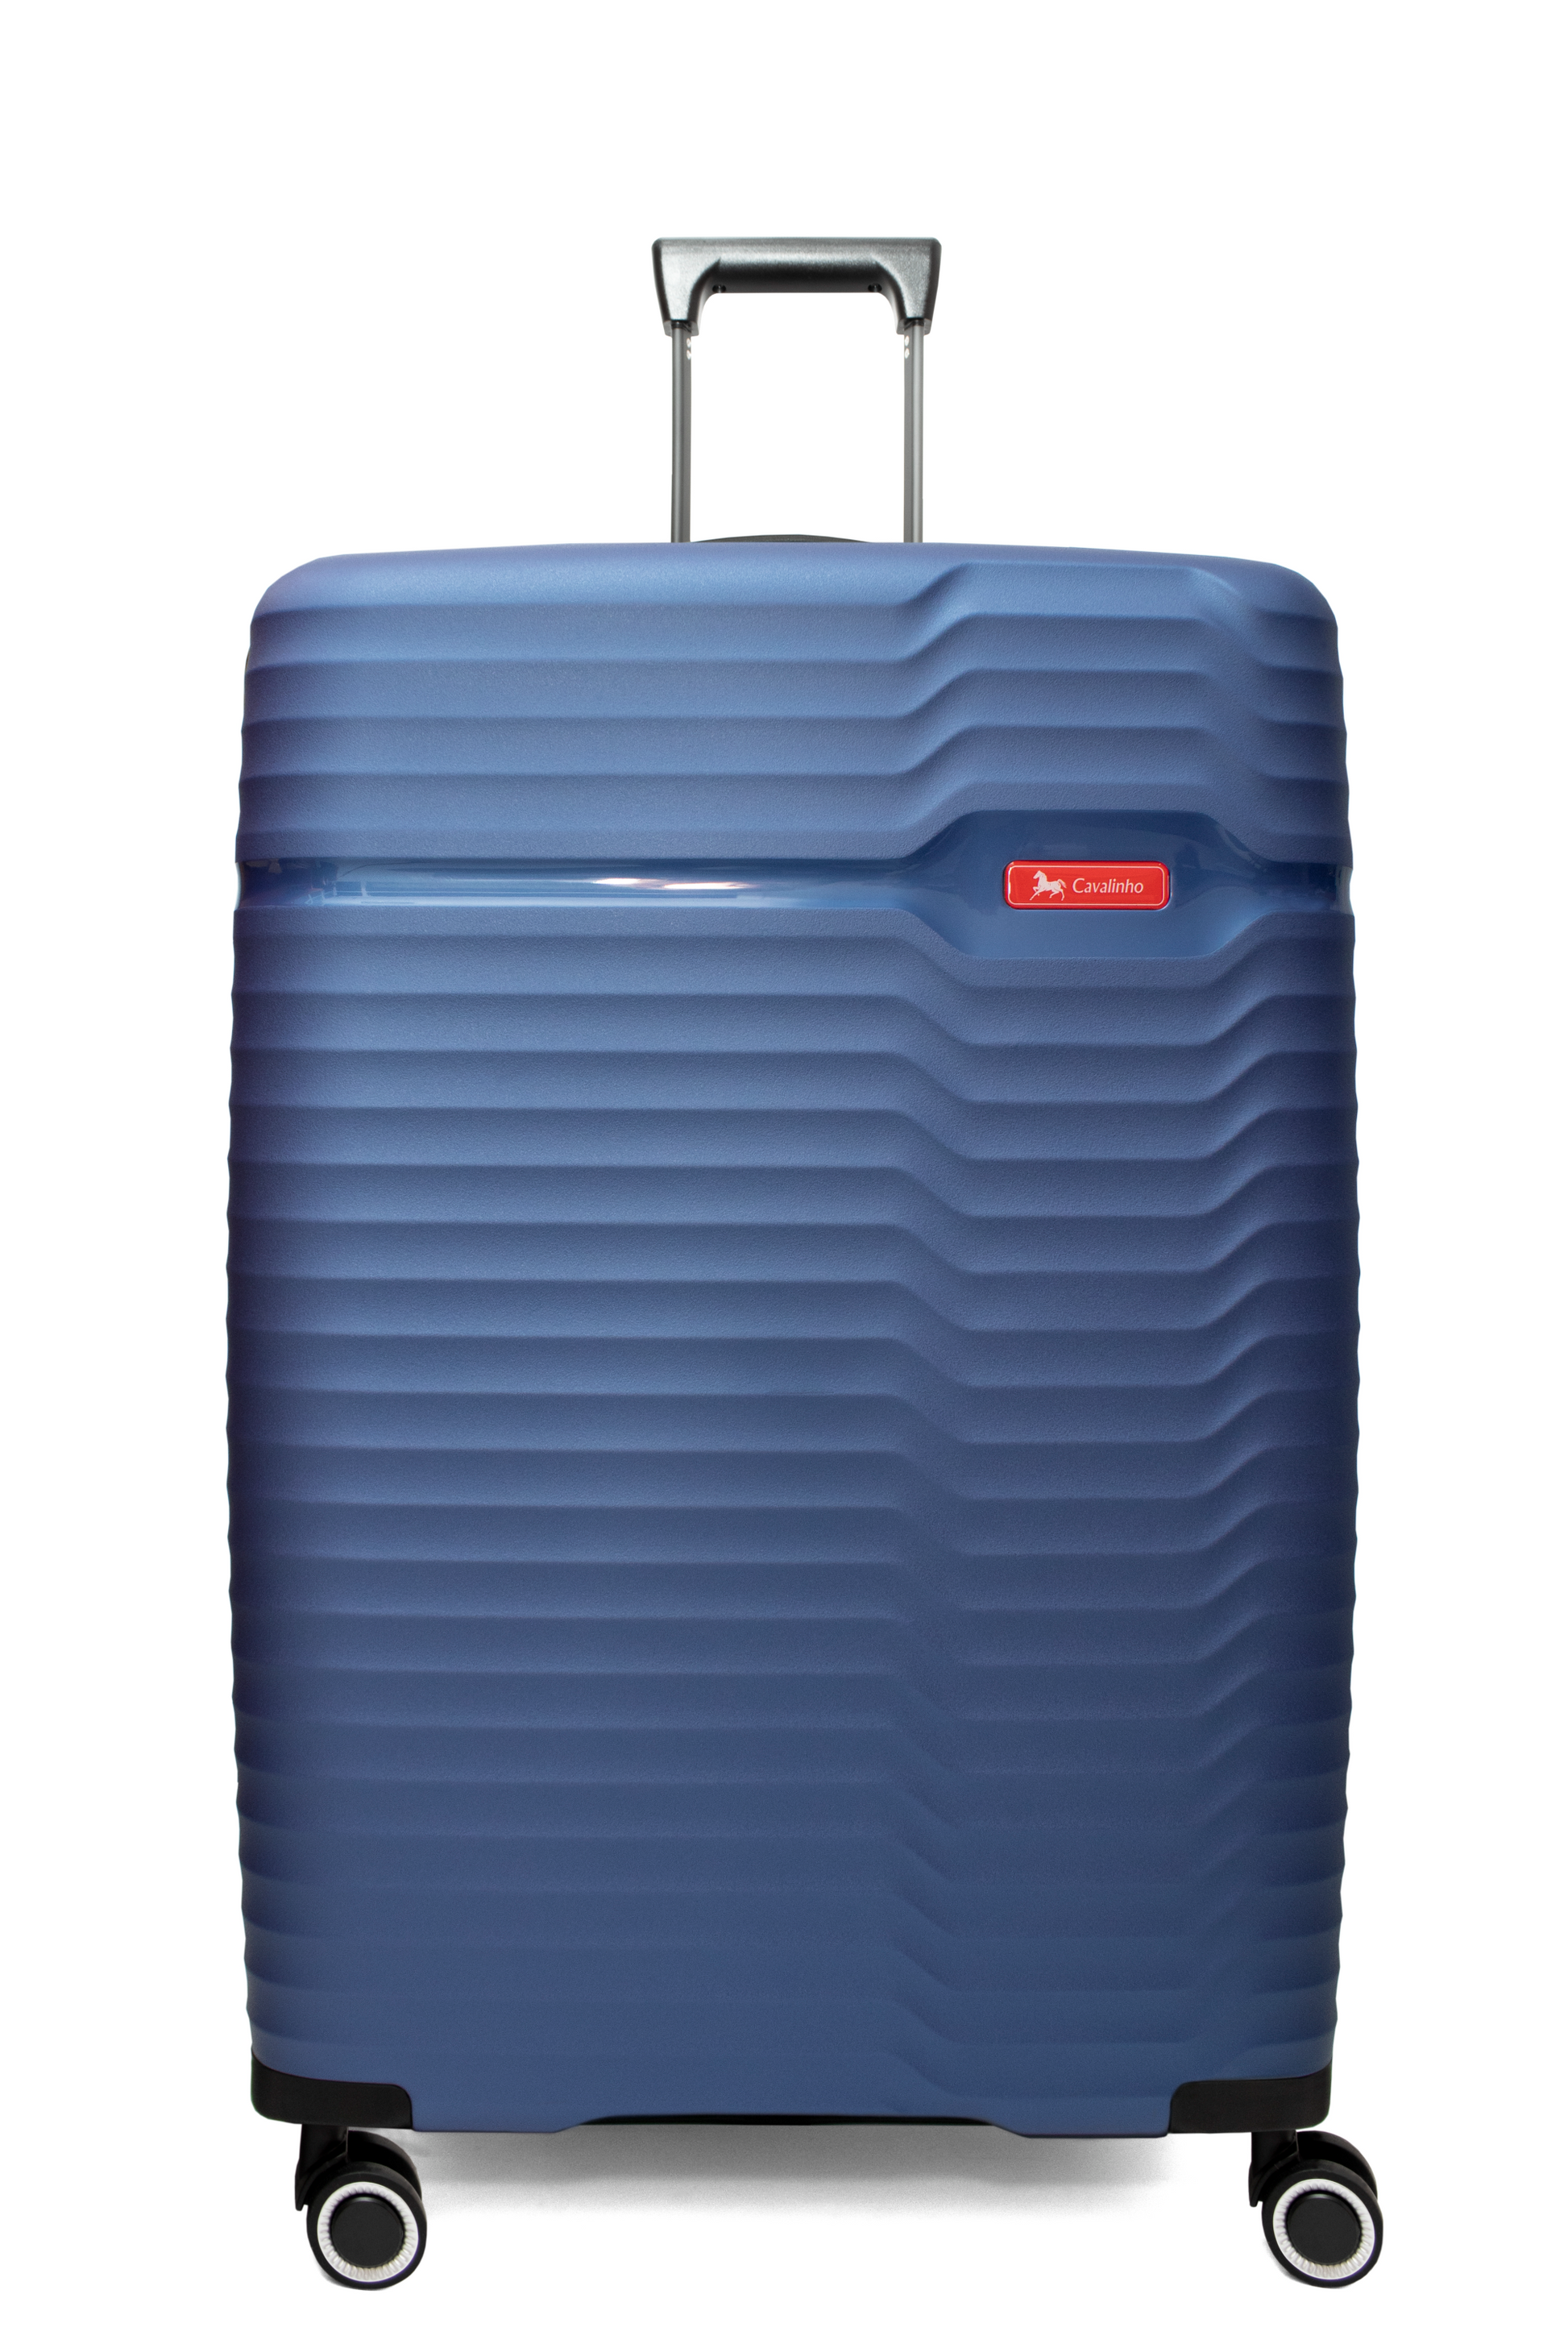 Cavalinho Check-in Hardside Luggage (24" or 28") - 28 inch SteelBlue - 68010003.03.28_1